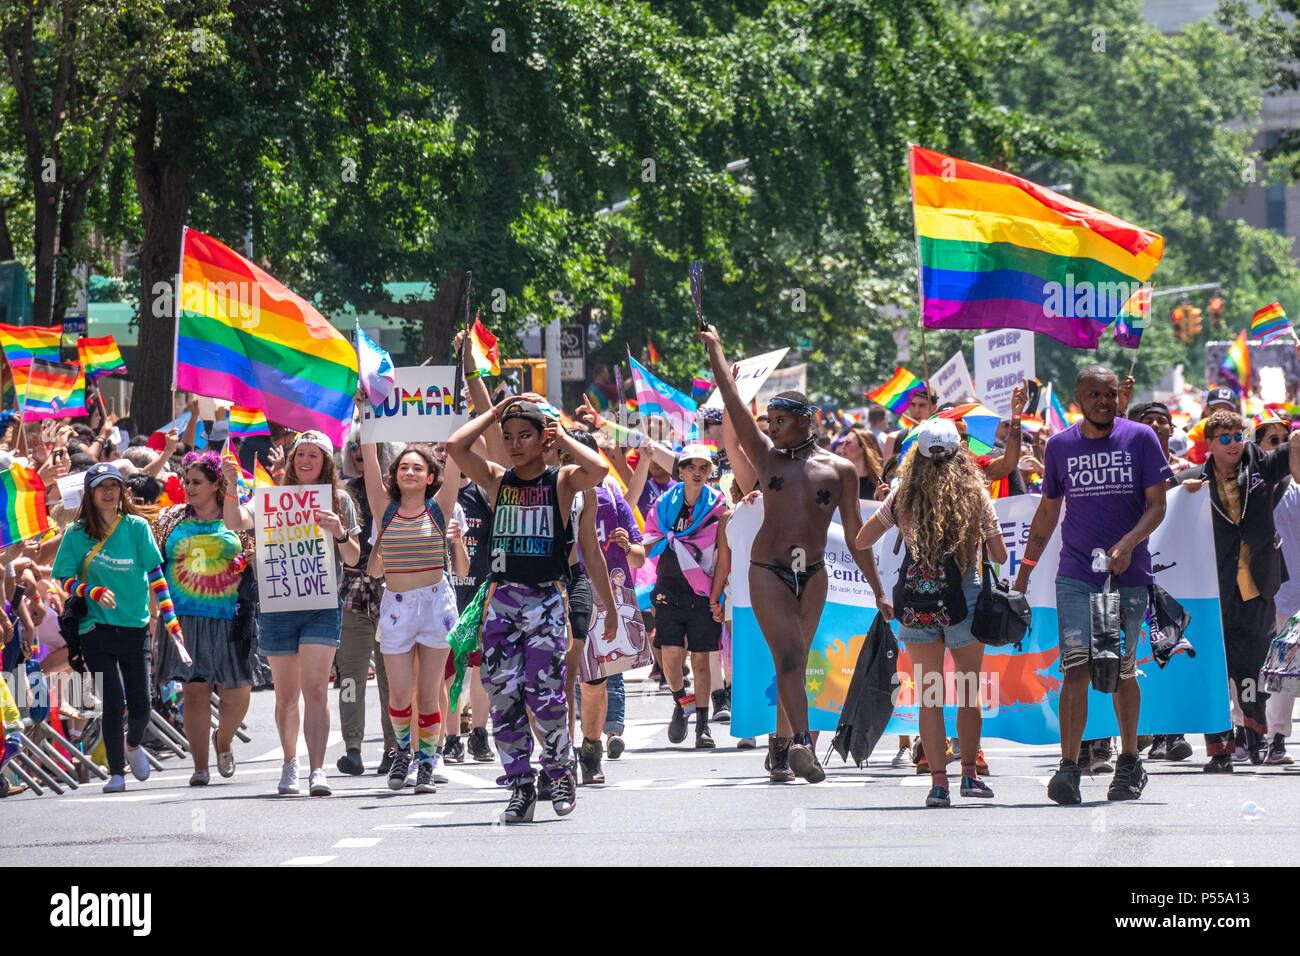 New York, USA, 24 June 2018. Participants in the New York City Pride Parade 2018. Credit: Enrique Shore/Alamy Live News Stock Photo